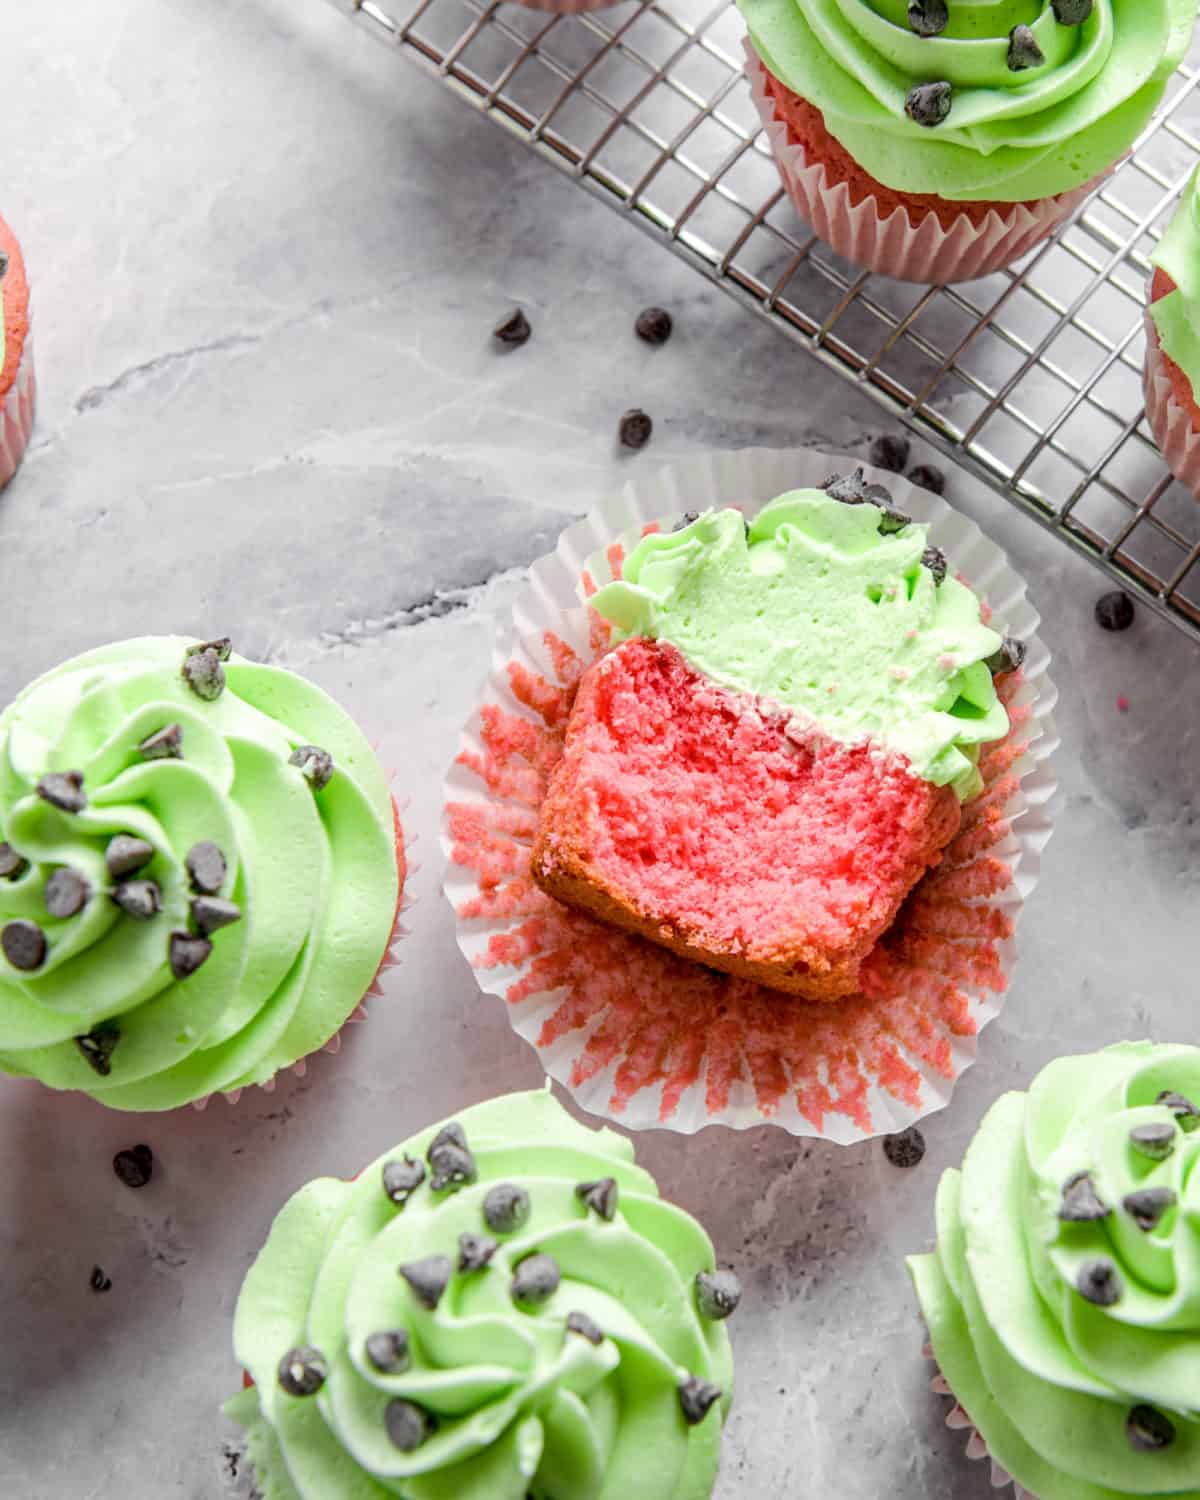 The inside of a pink and green cupcake.